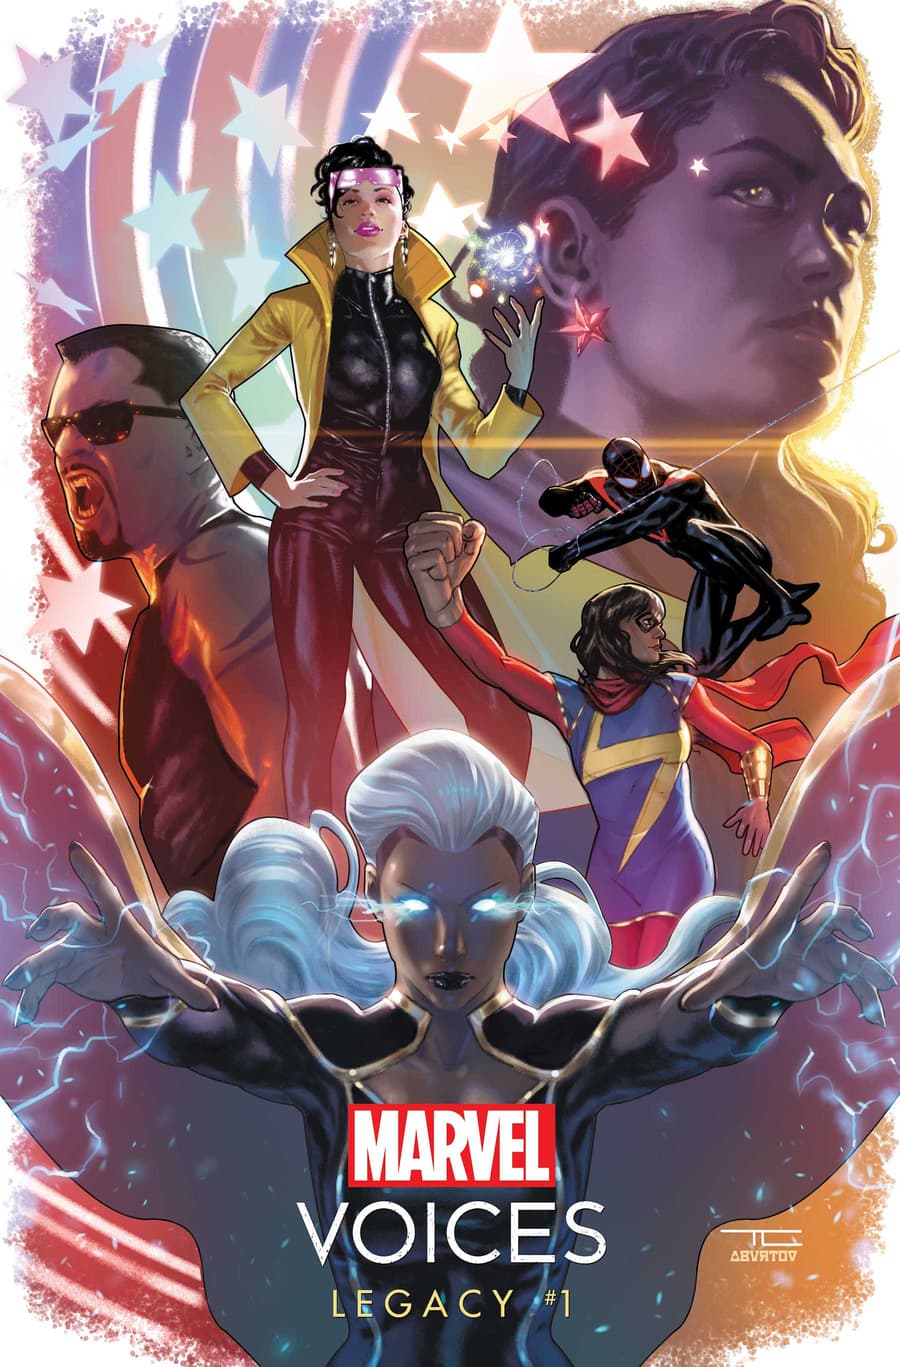 MARVEL’S VOICES: LEGACY #1